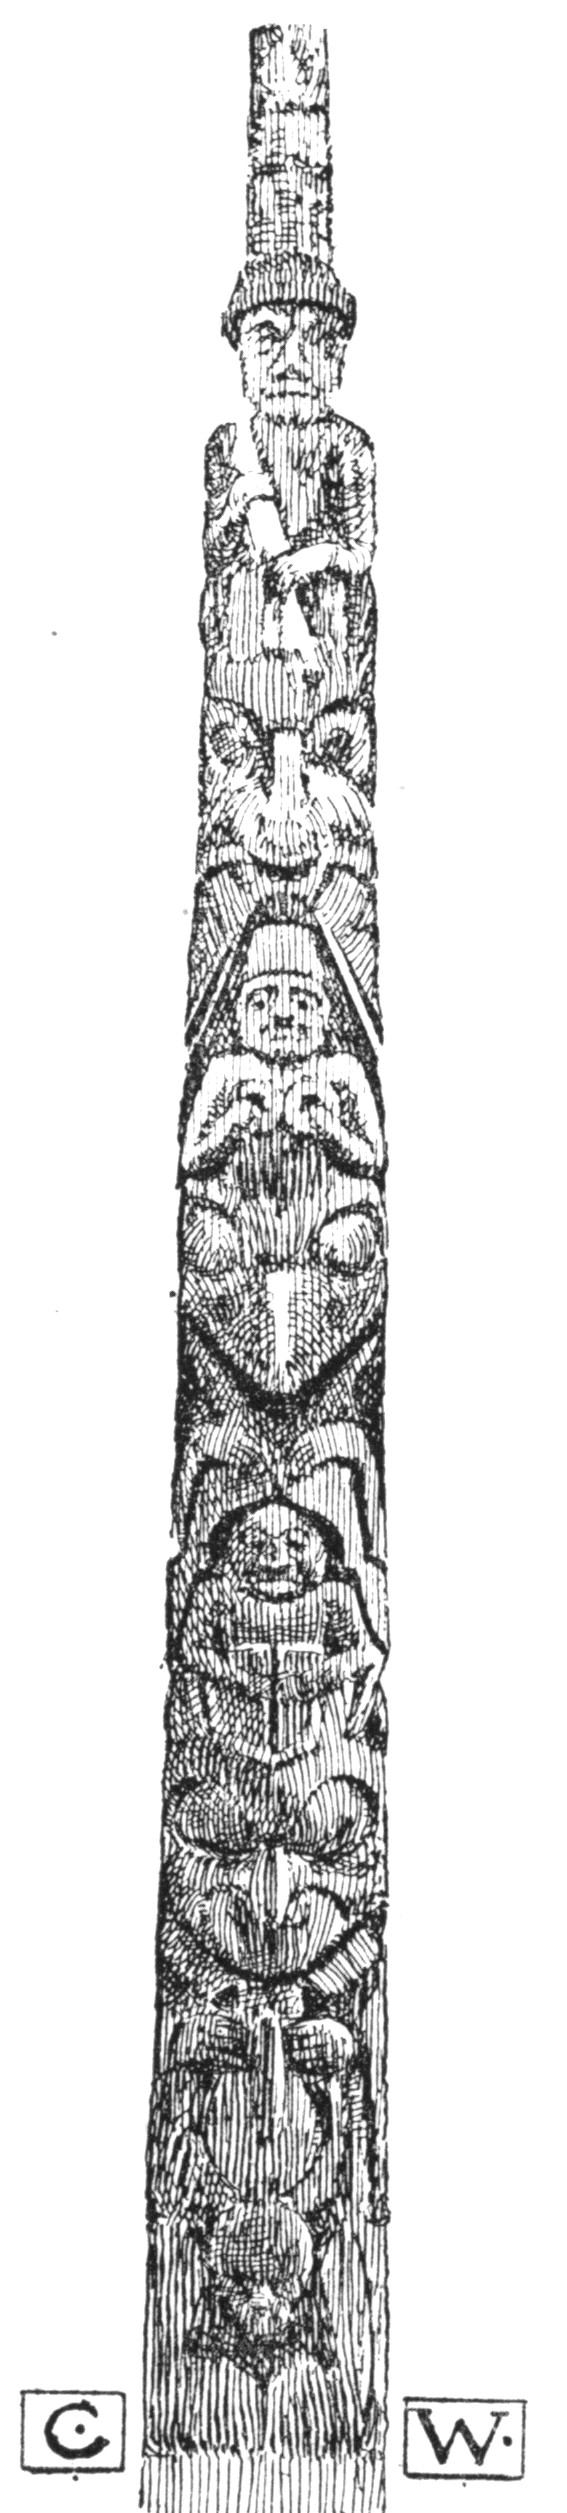 Totem Pole, 38 ft. high, Haida, Qn. Charlotte Is. (now in Brit. Mus.).